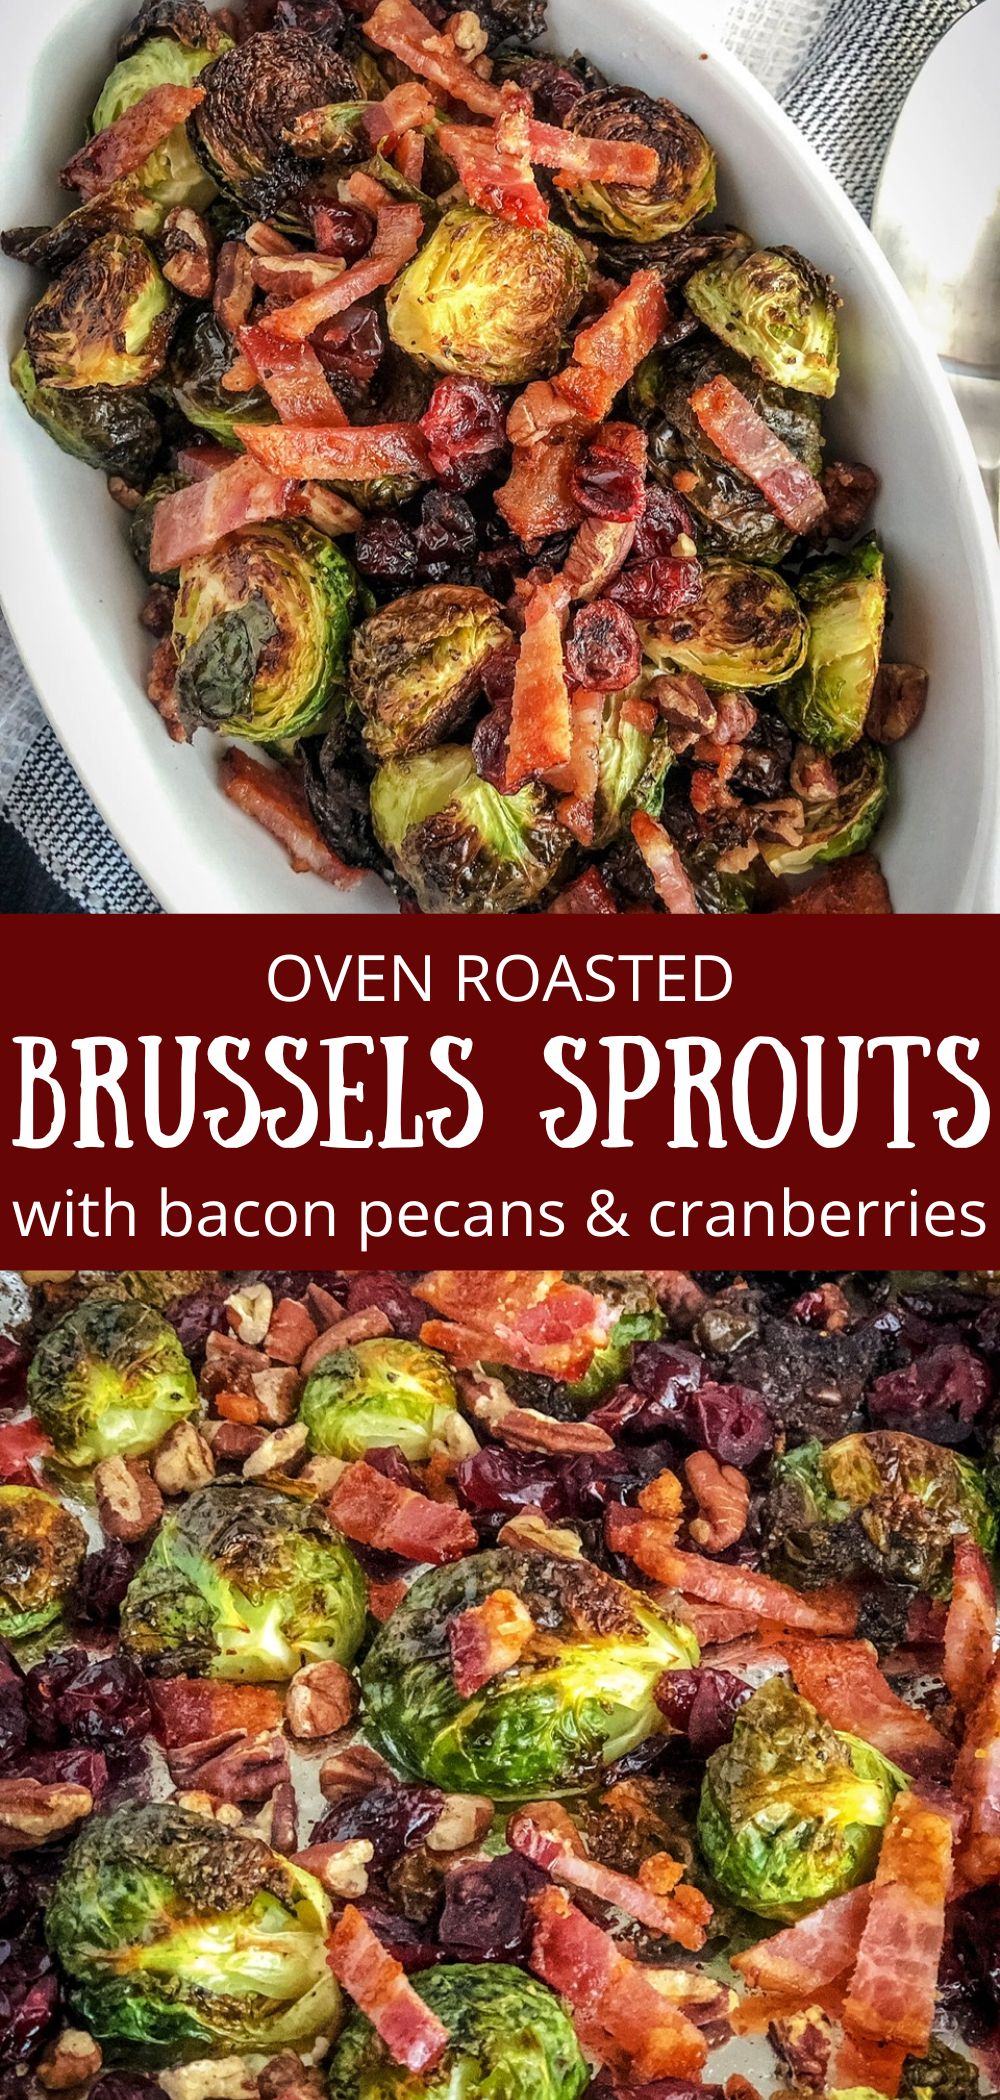 Oven Roasted Brussels Sprouts with Bacon | Donuts2Crumpets